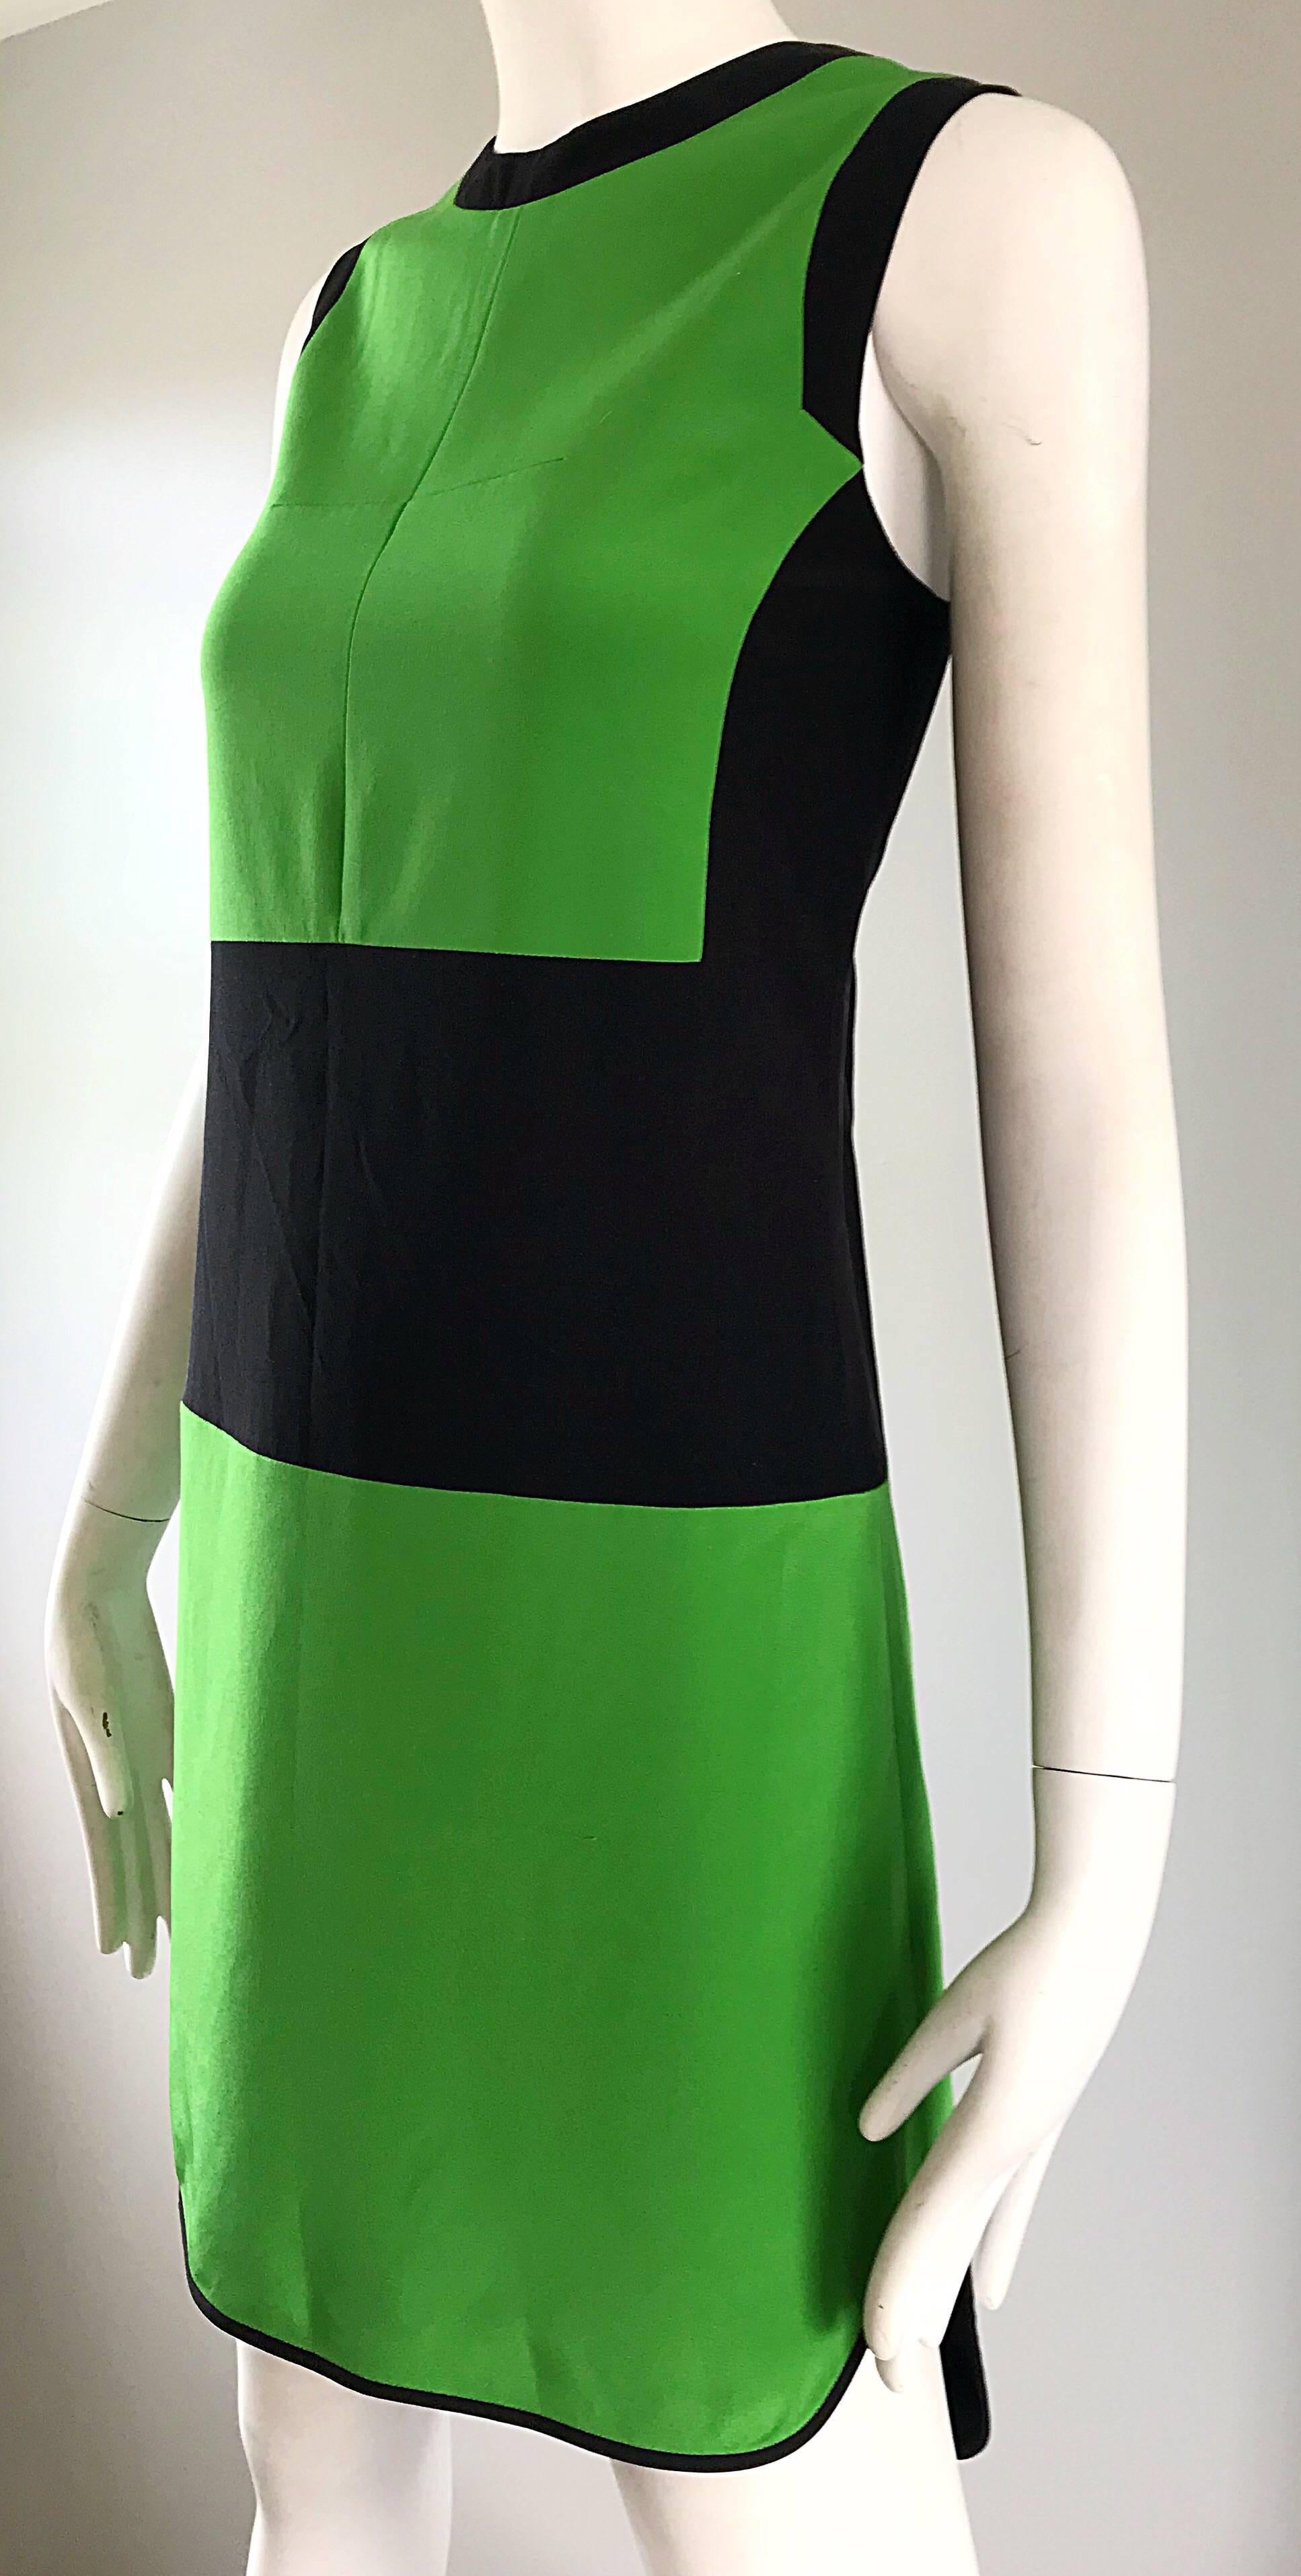 green and black colorblock dress